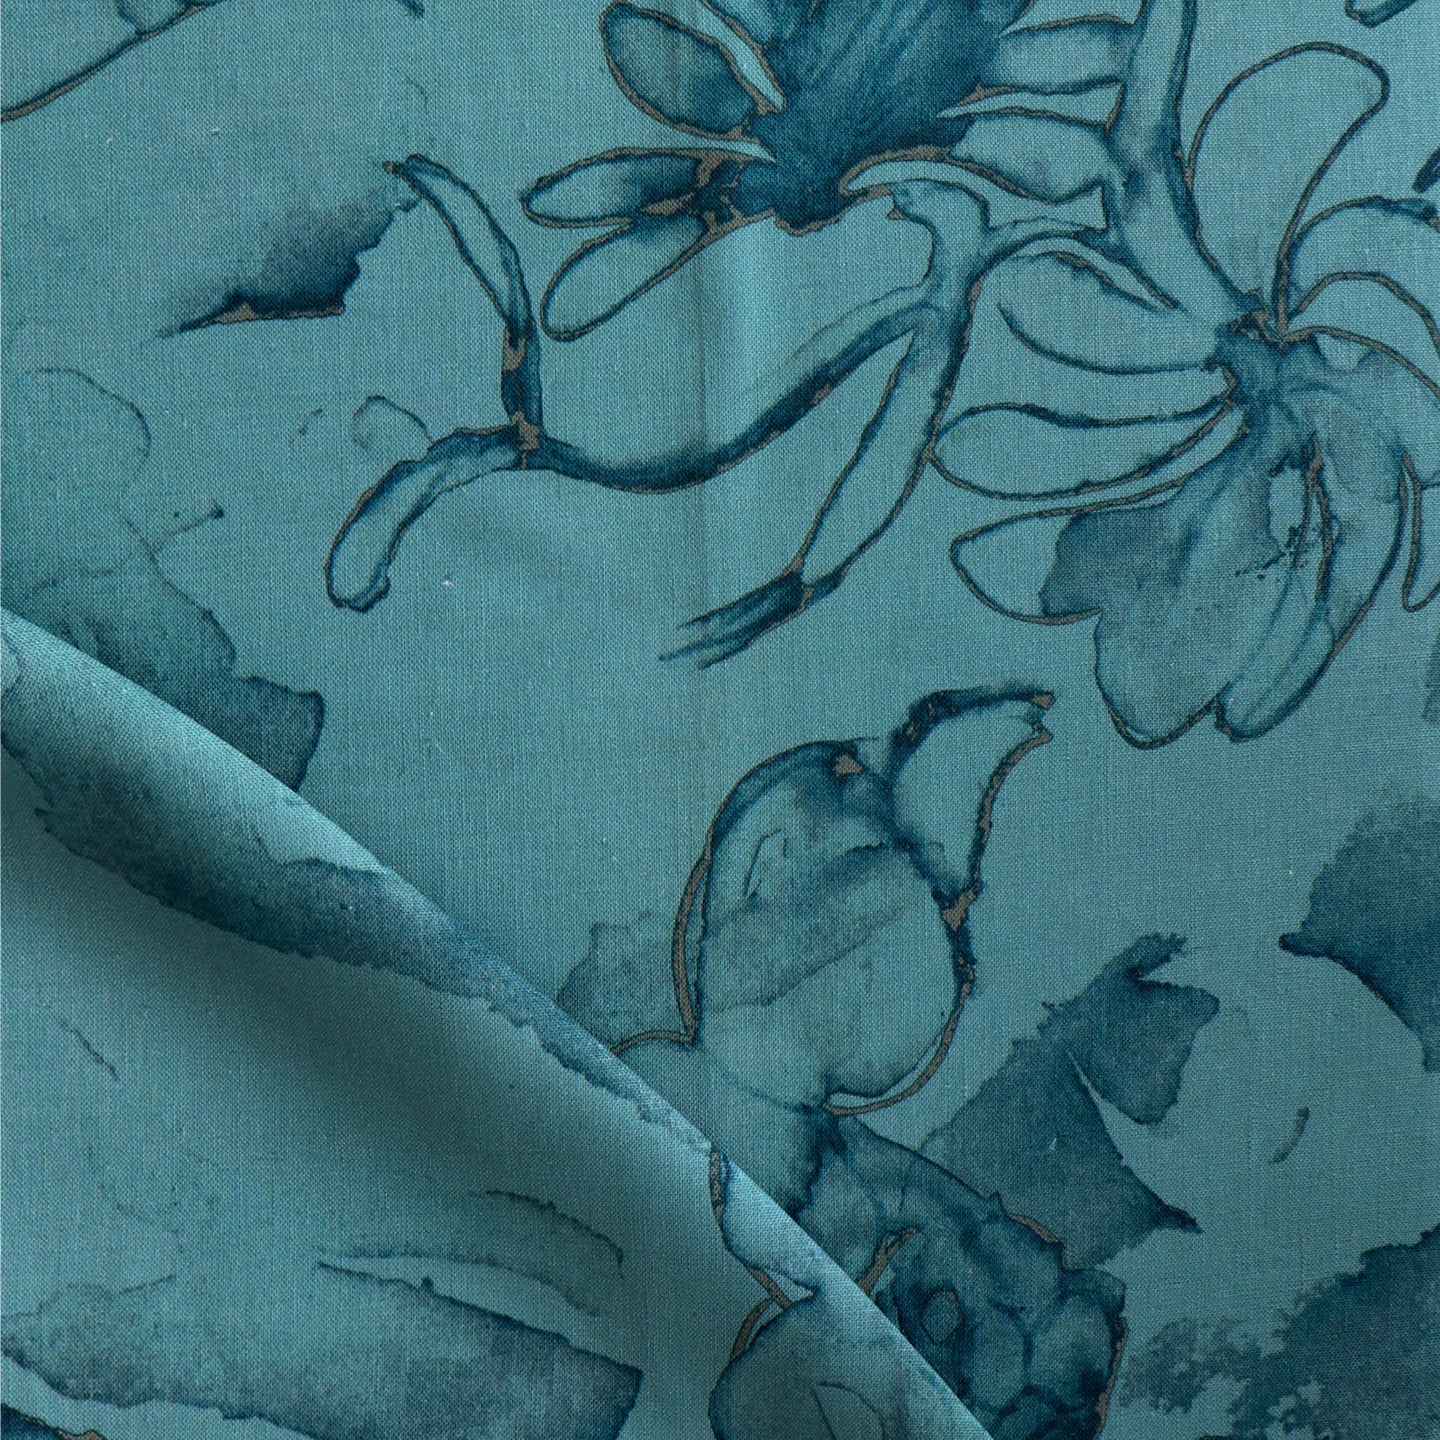 A close up of a teal fabric with flowers